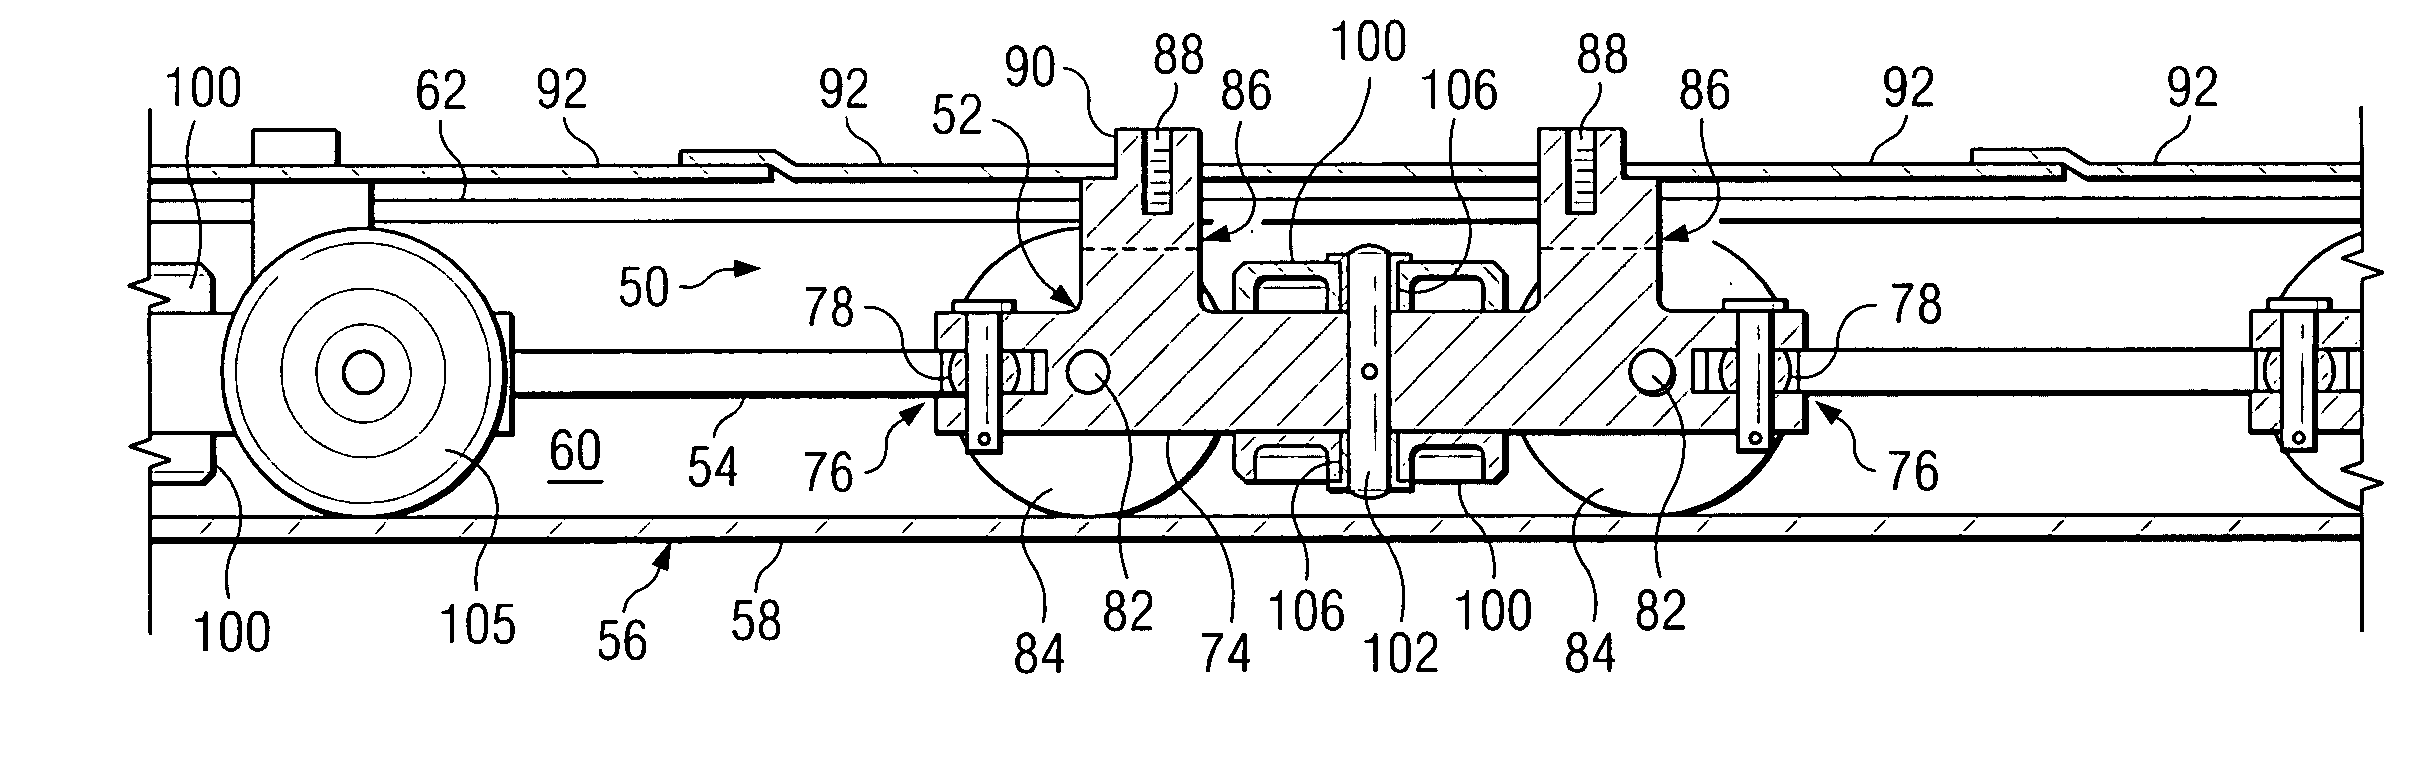 Conveyor for continuous proofing and baking apparatus